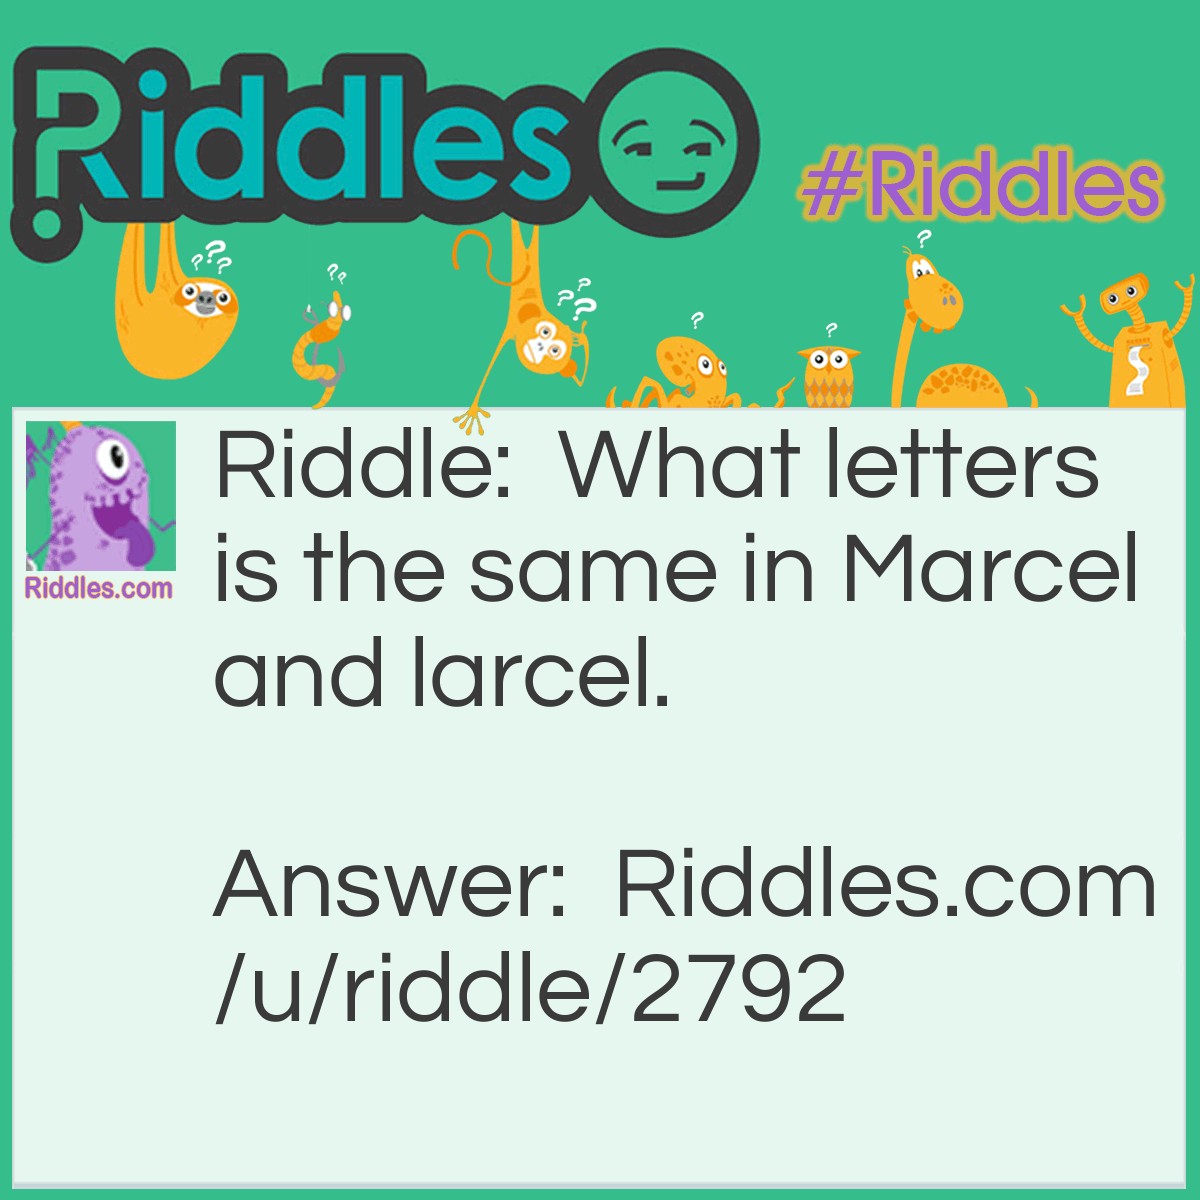 Riddle: What letters is the same in Marcel and larcel. Answer: The letters are A, R, C, E, and l.